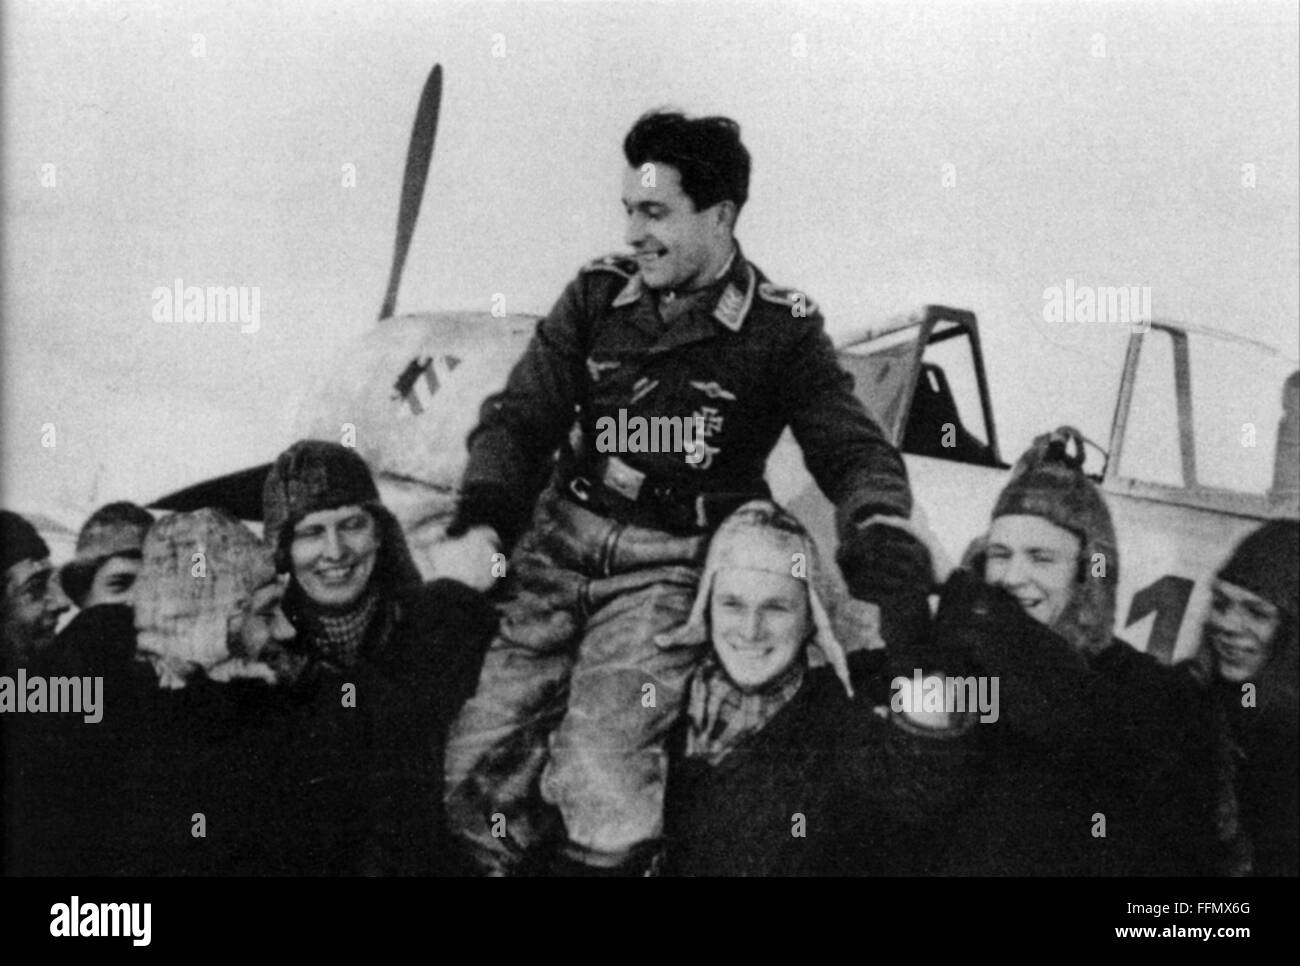 Kittel, Otto 'Bruno', 21.2.1917 - 16.2.1945, German fighter pilot, half length, As staff sergeant in the Fighter Wing 54, is hailed by his comrades after his 39th air victory, Krasnogvardeysk, Russia, 19.2.1943, Stock Photo